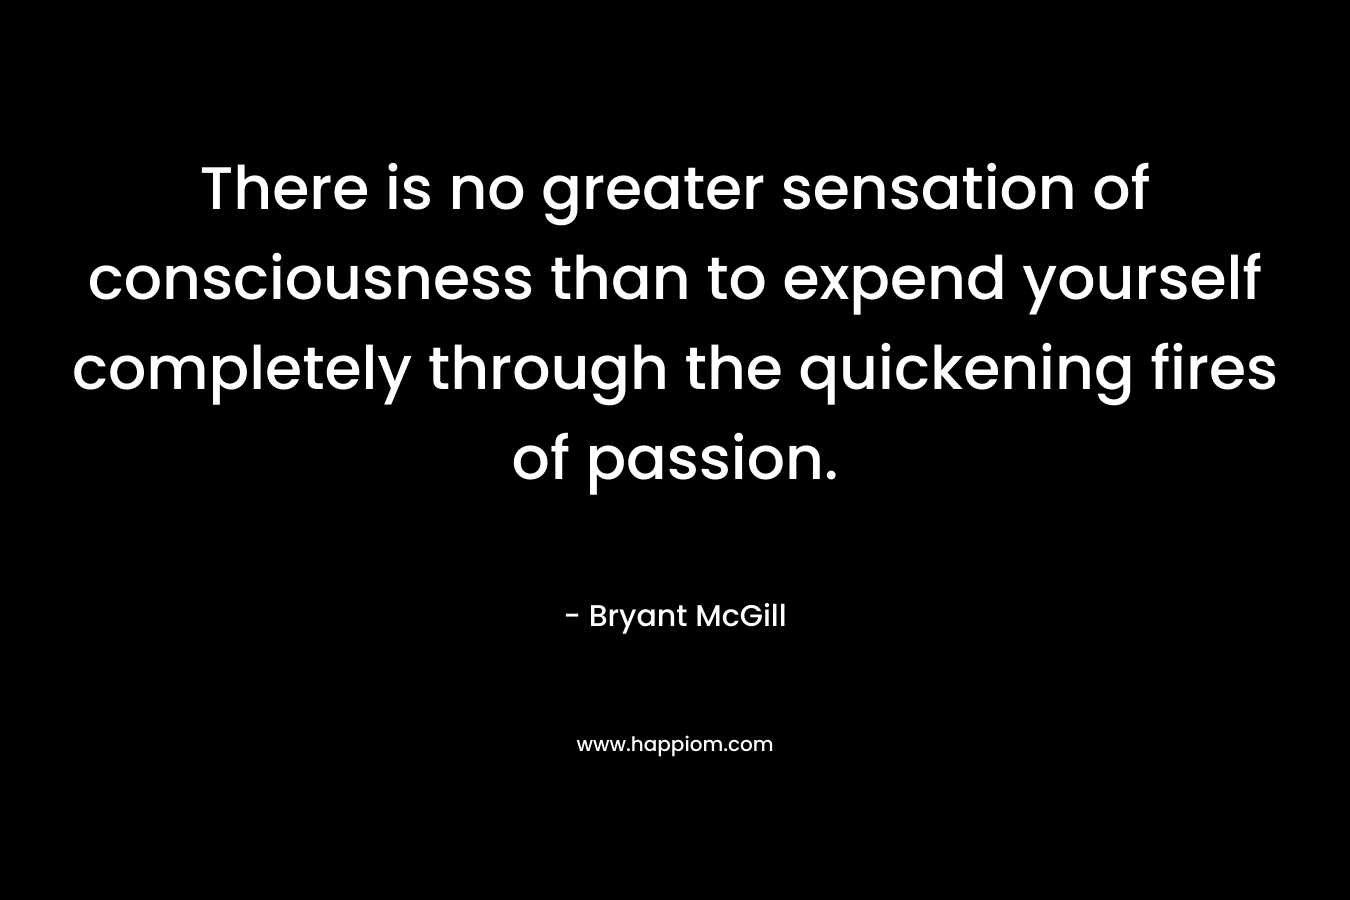 There is no greater sensation of consciousness than to expend yourself completely through the quickening fires of passion.